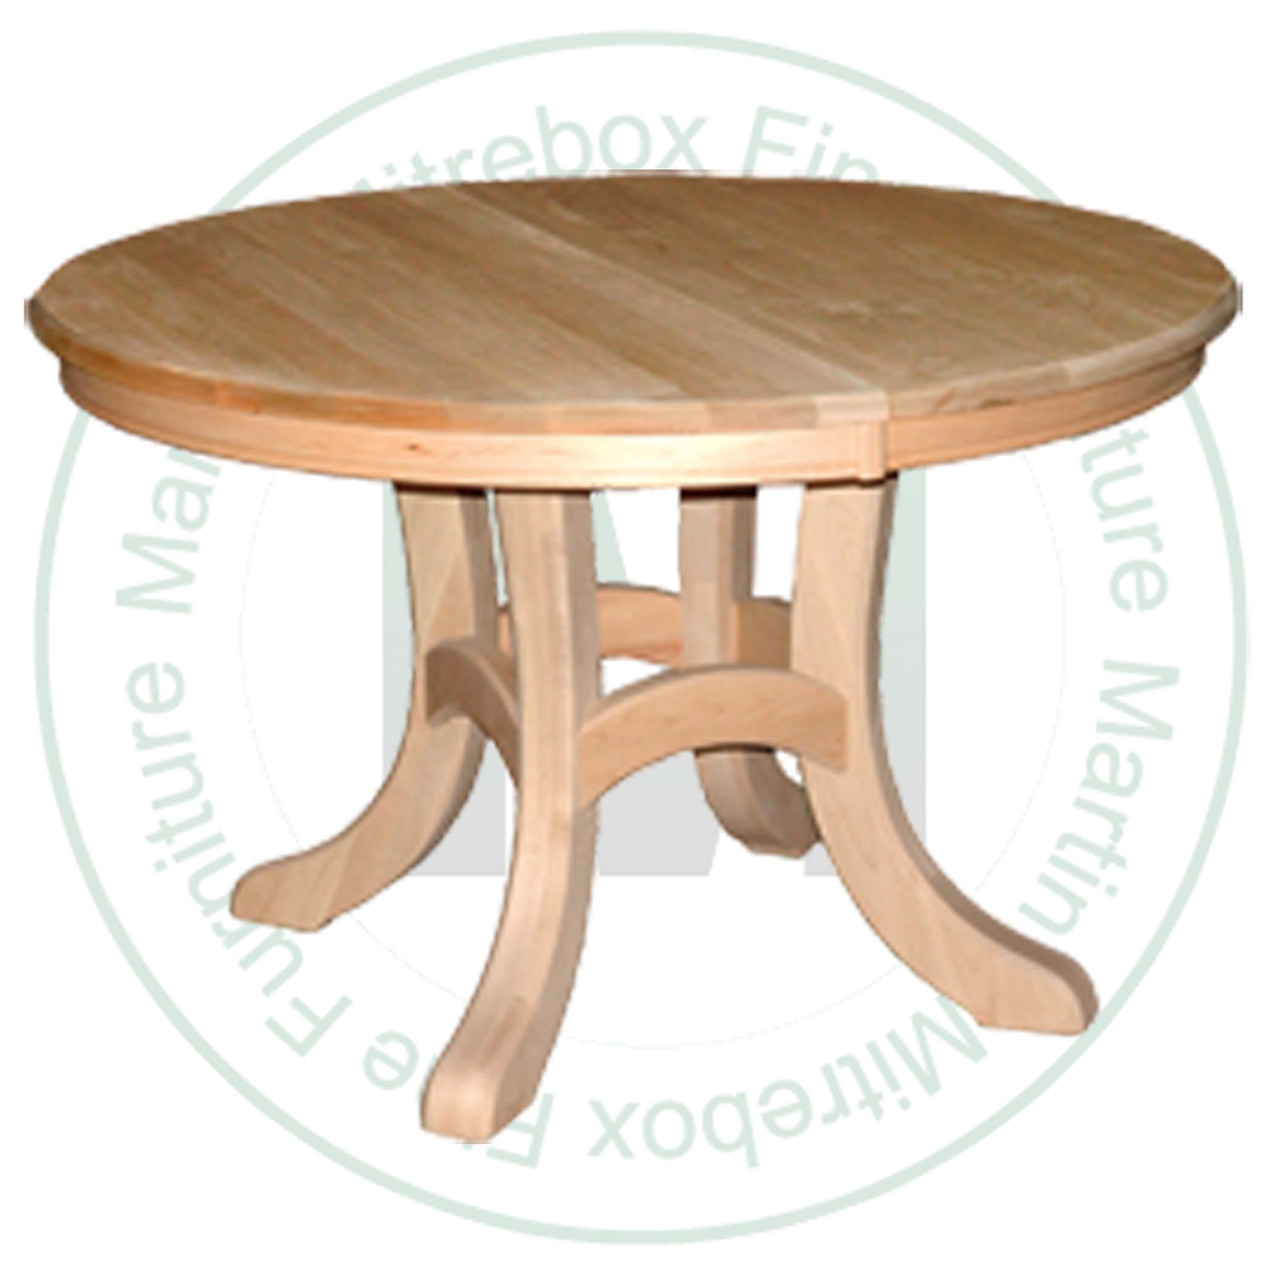 Oak Cairo Single Pedestal Table 60''D x 60''W x 30''H Round Solid Top Table